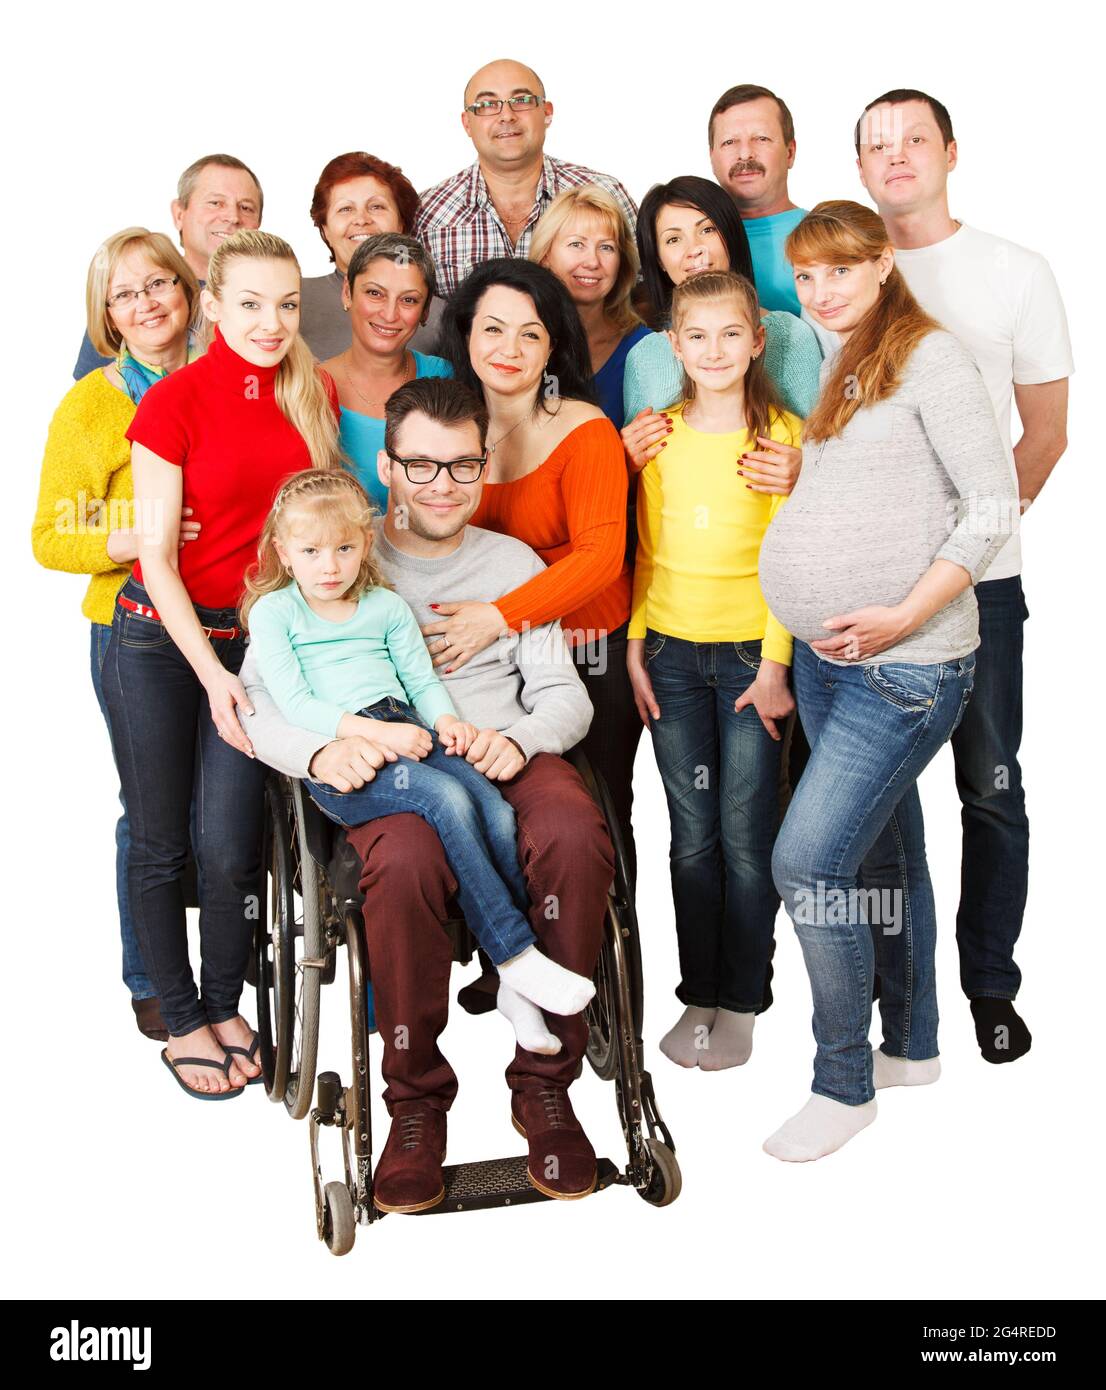 Portrait of a large group of a Mixed Age people smiling and embracing together with Disabled Man. Stock Photo